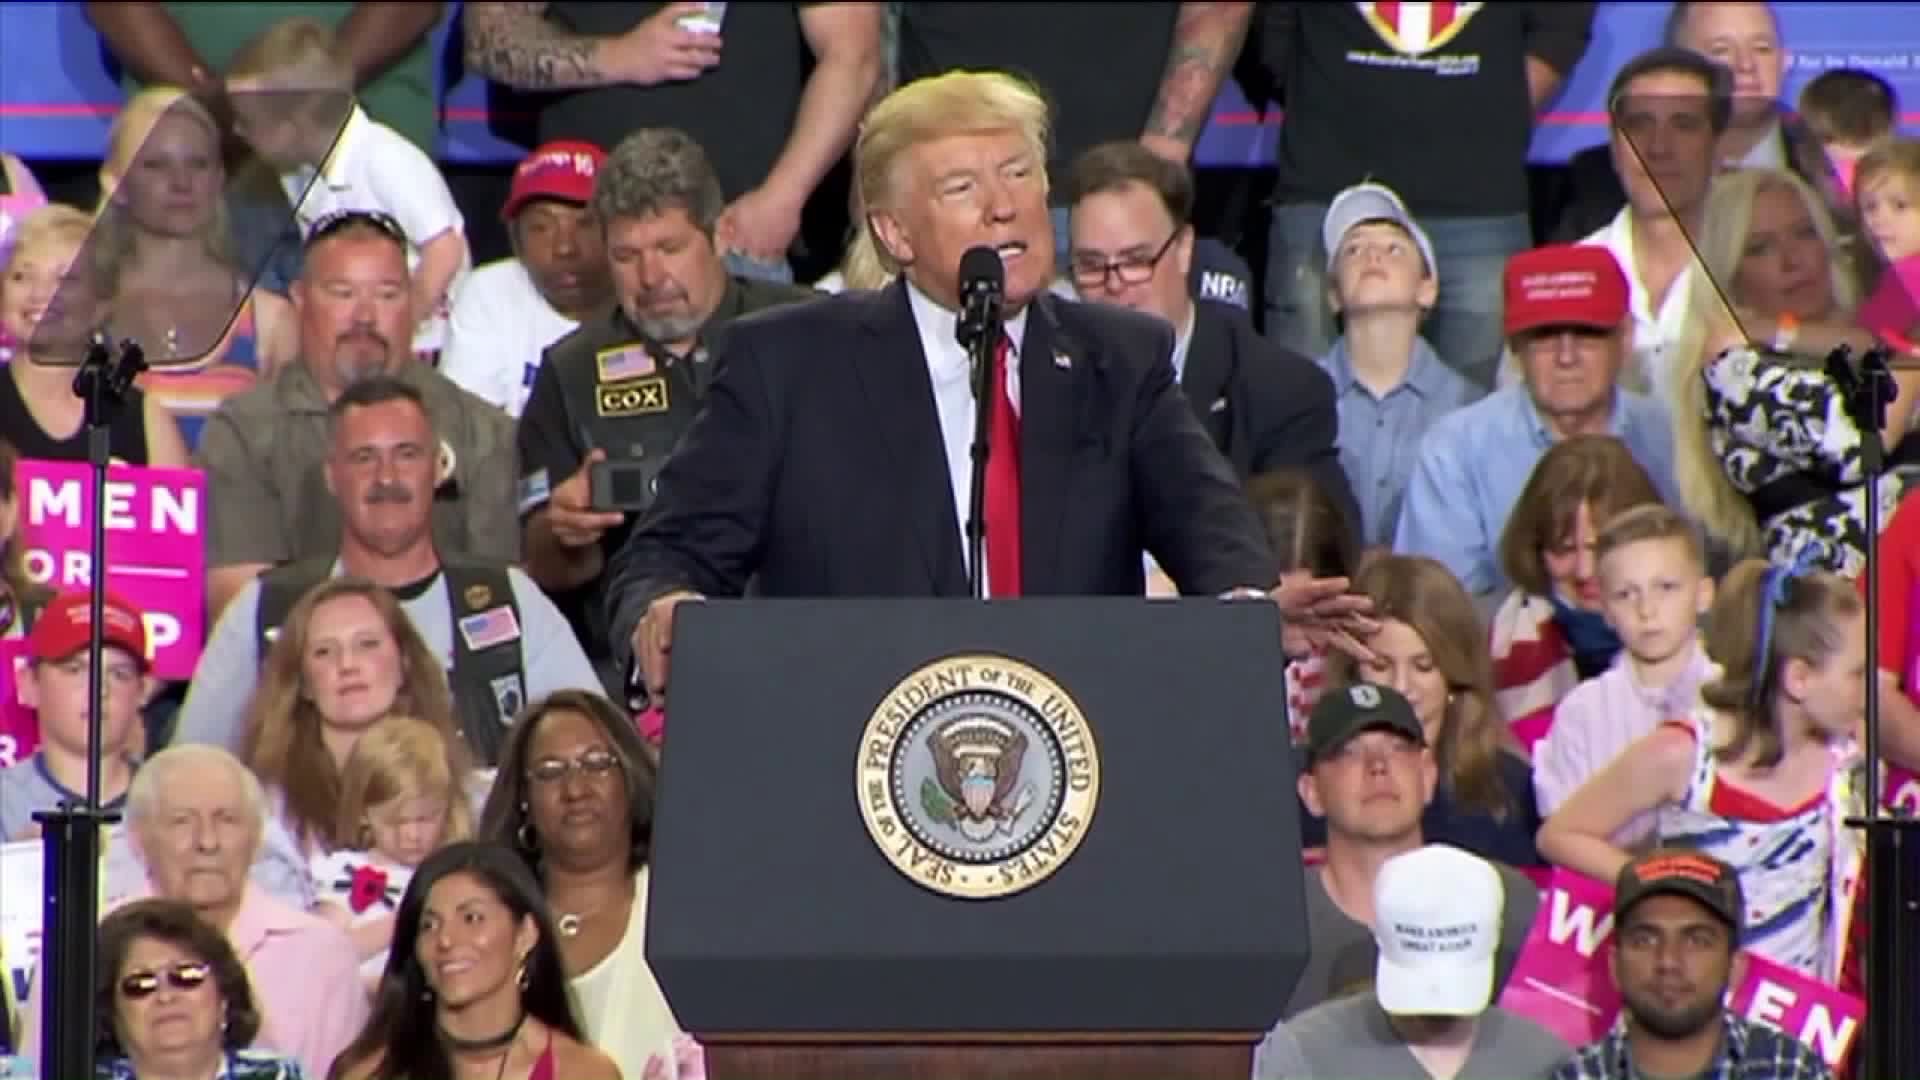 President Trump gives speech as today marks first 100 days in office